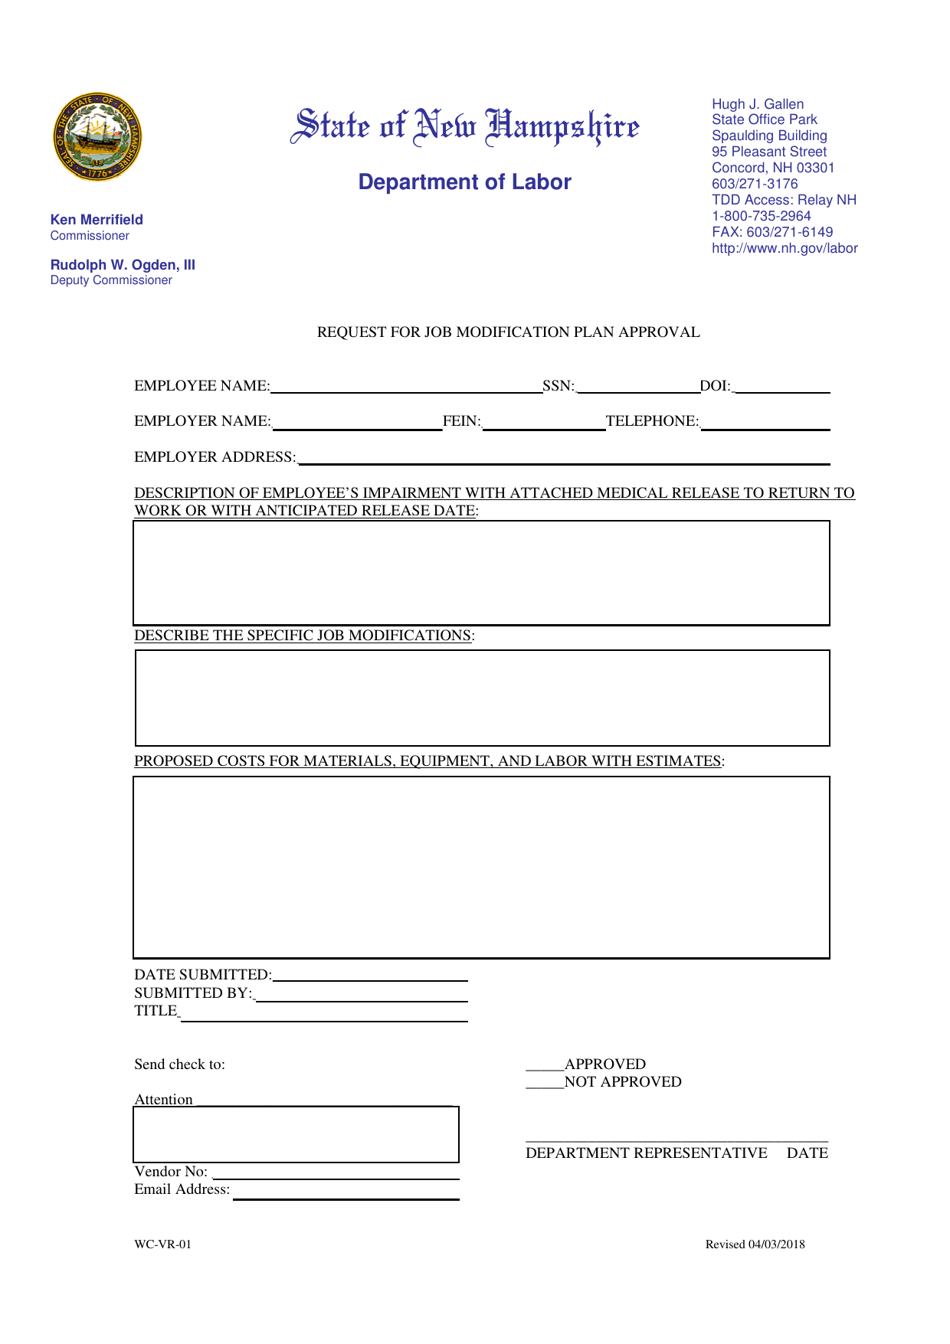 Form WC-VR-01 Request for Job Modification Plan Approval - New Hampshire, Page 1